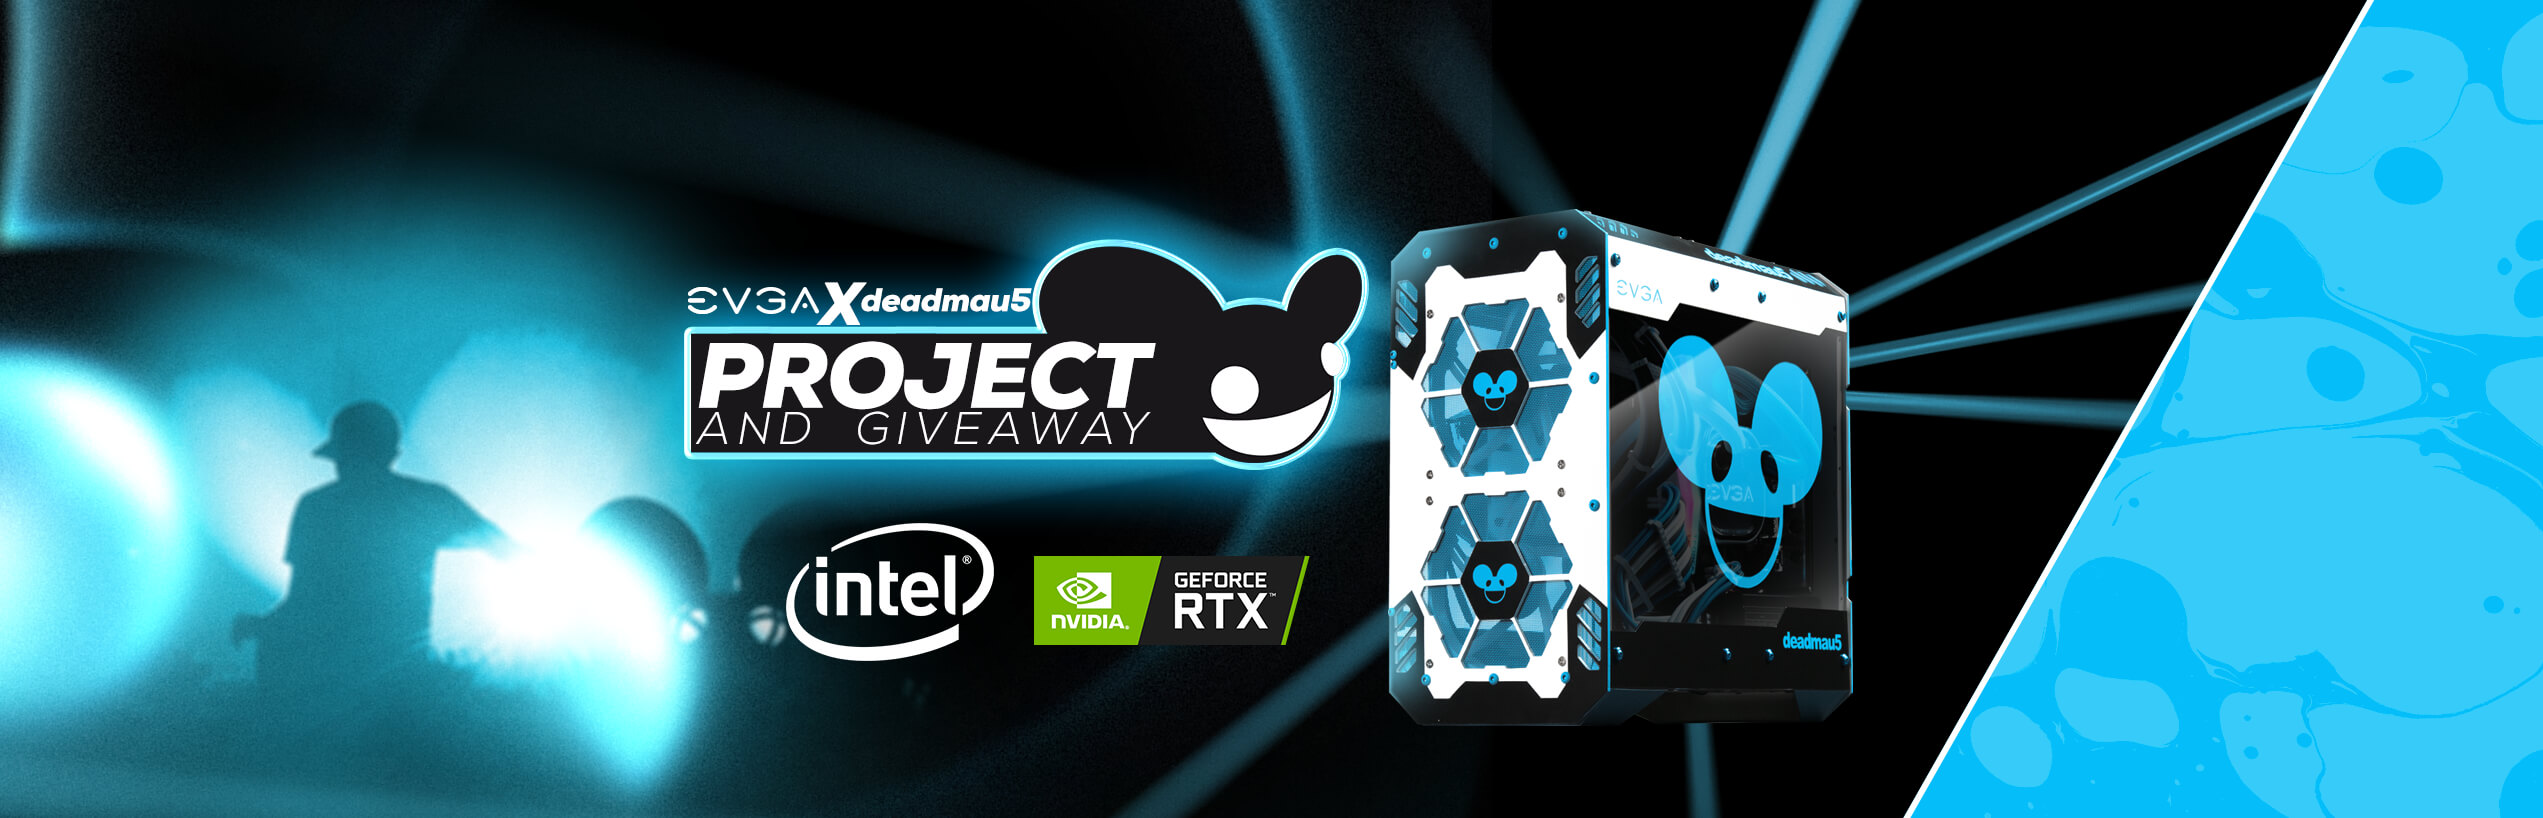 EVGA x deadmau5 Project and Giveaway